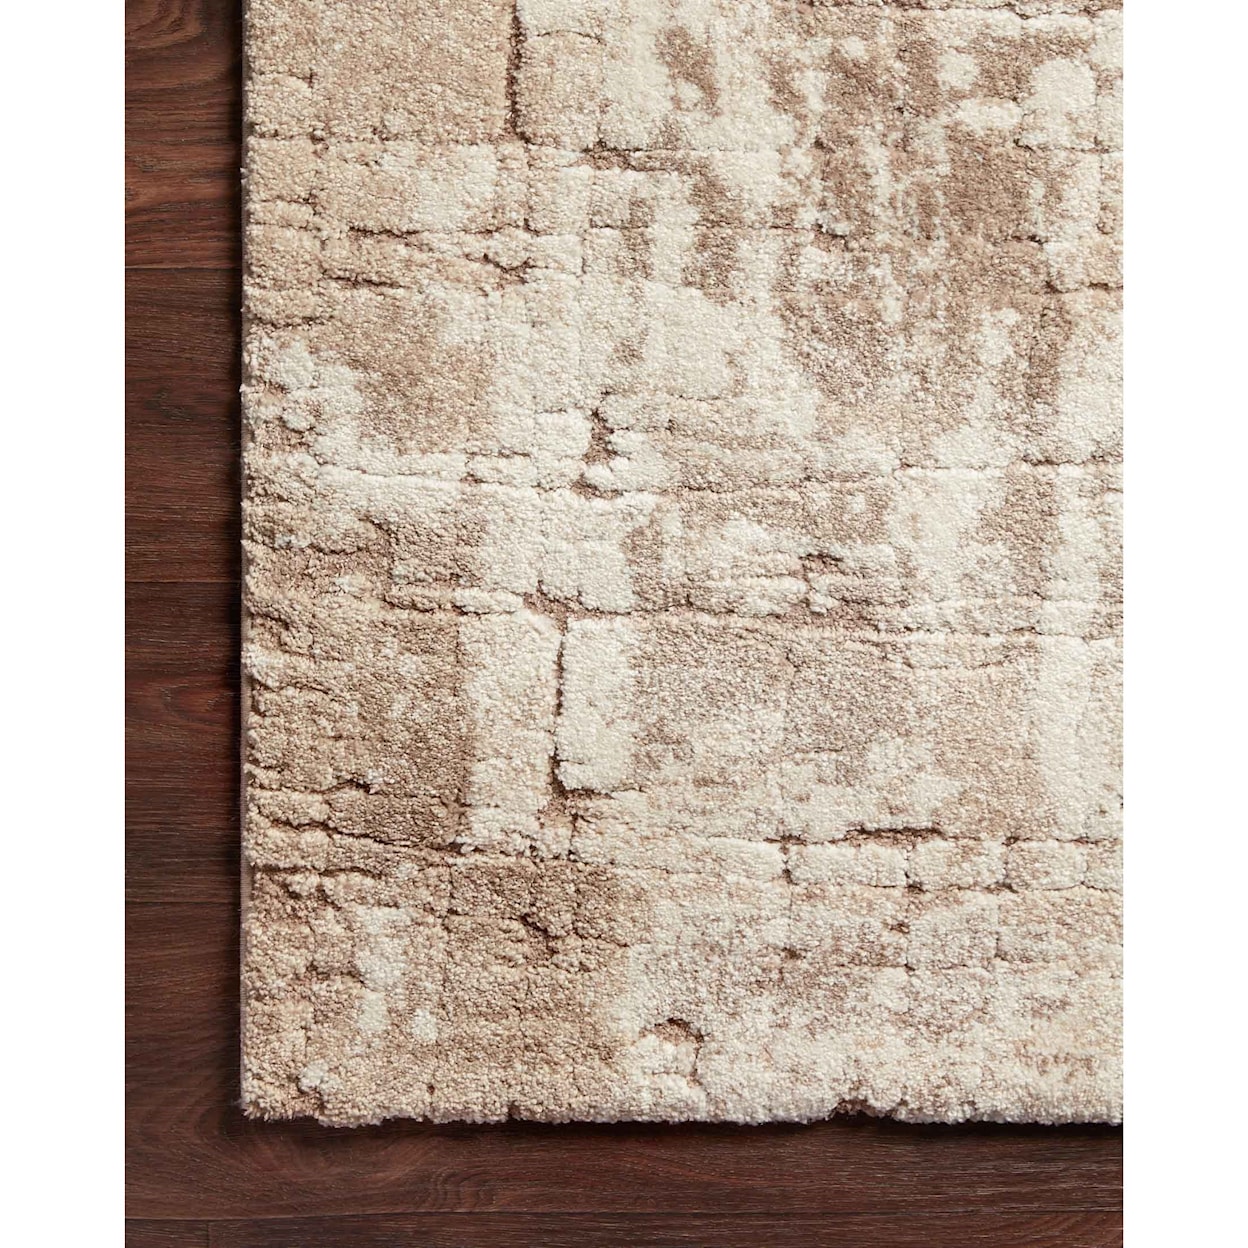 Reeds Rugs Theory 3'7" x 5'7" Beige / Taupe Rug